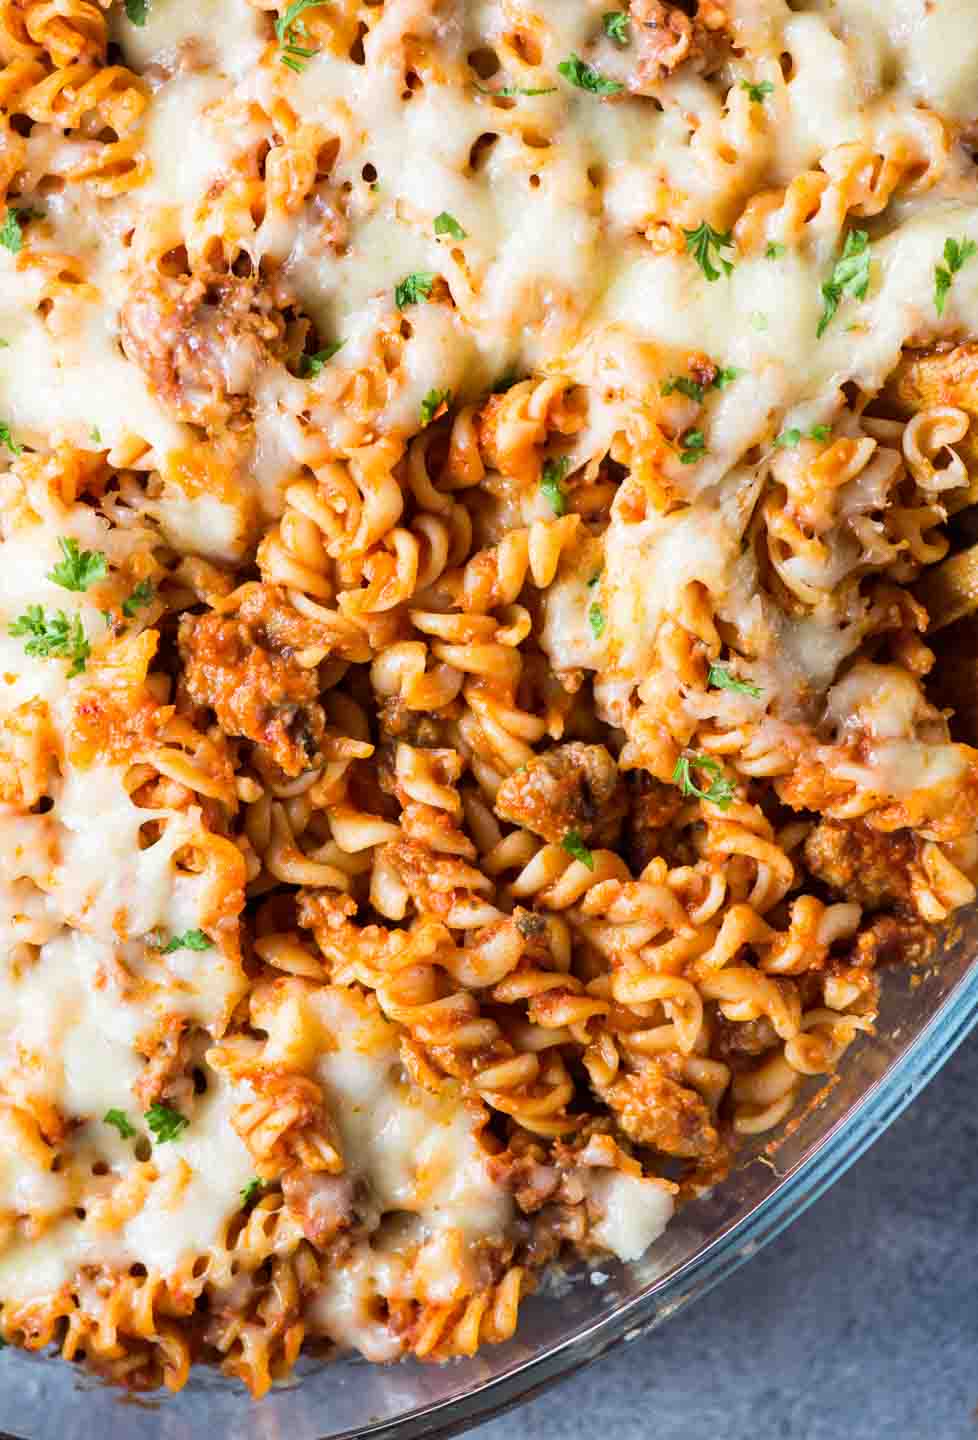 Tangy tomato sauce, spicy Italian Sausage and lots of cheese together makes this baked pasta dish delicious and super satisfying. 